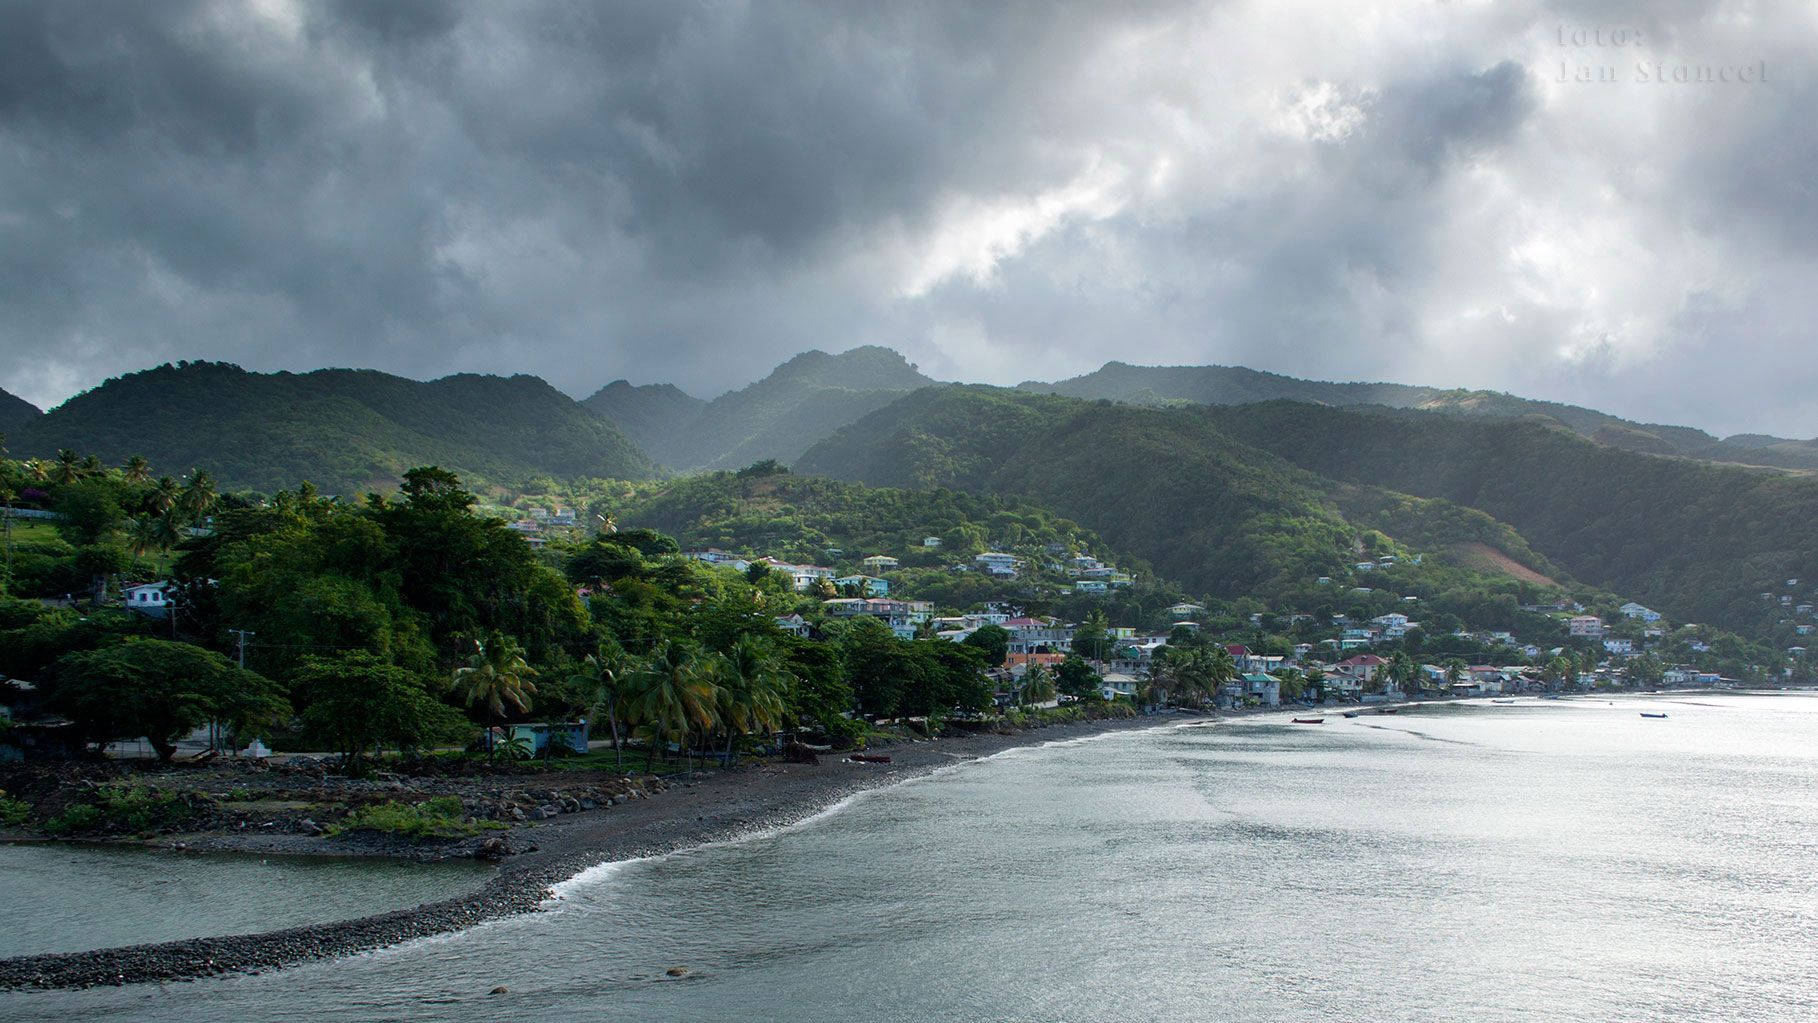 Ocean Front Houses In Dominica Background